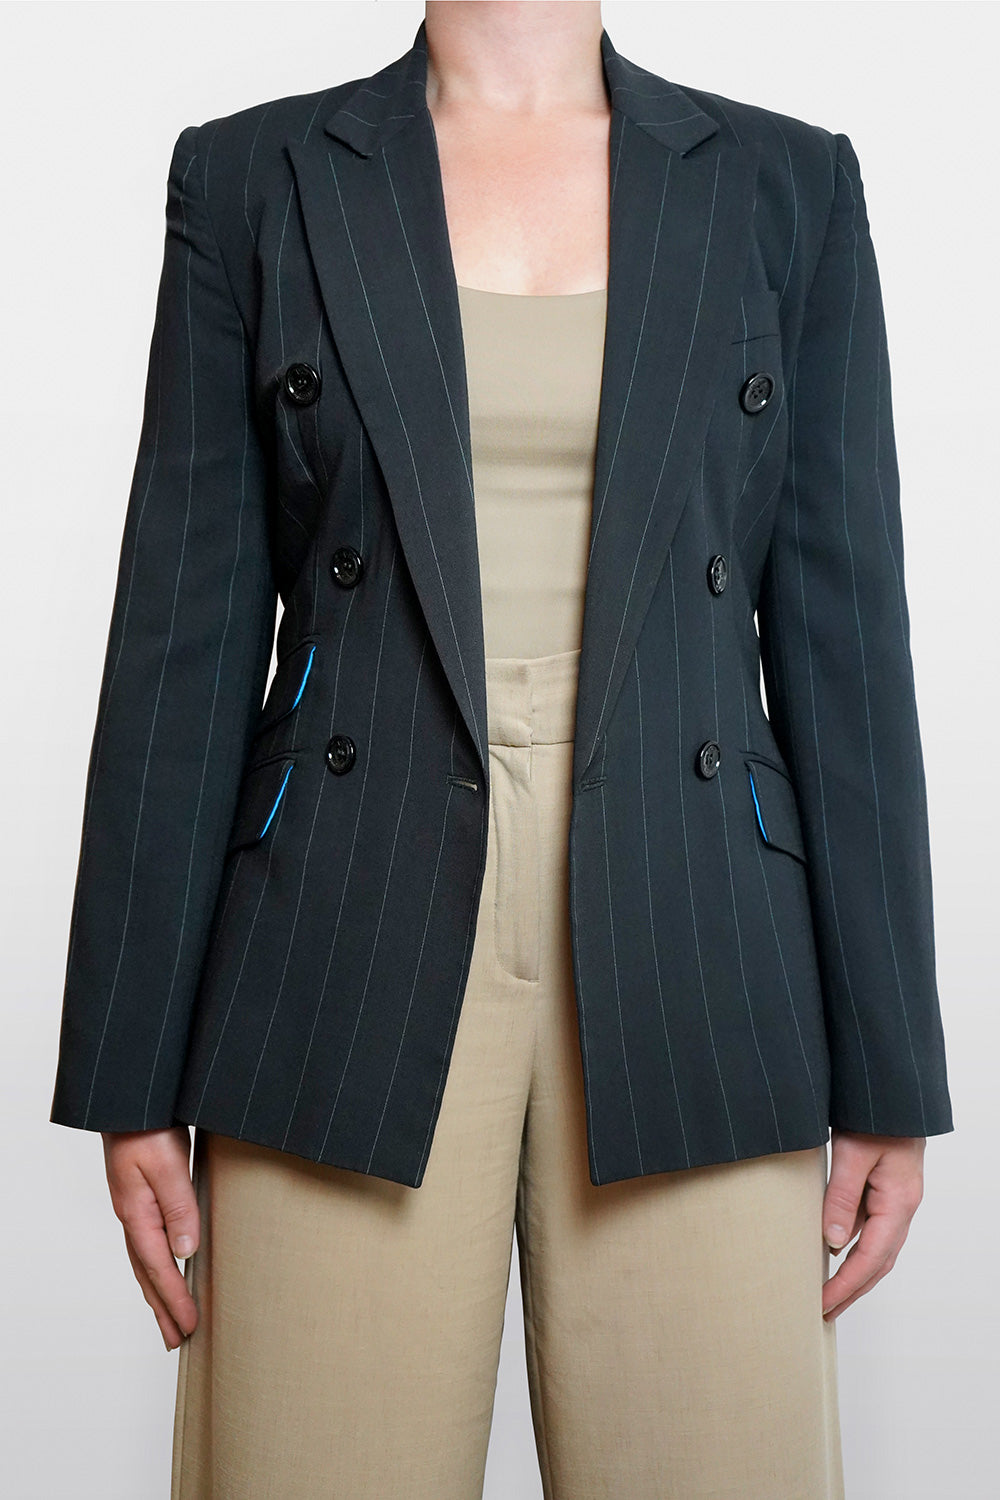 Dolce & Gabbana Pre-Owned Double Breasted Pinstripe Blazer Size 6-8